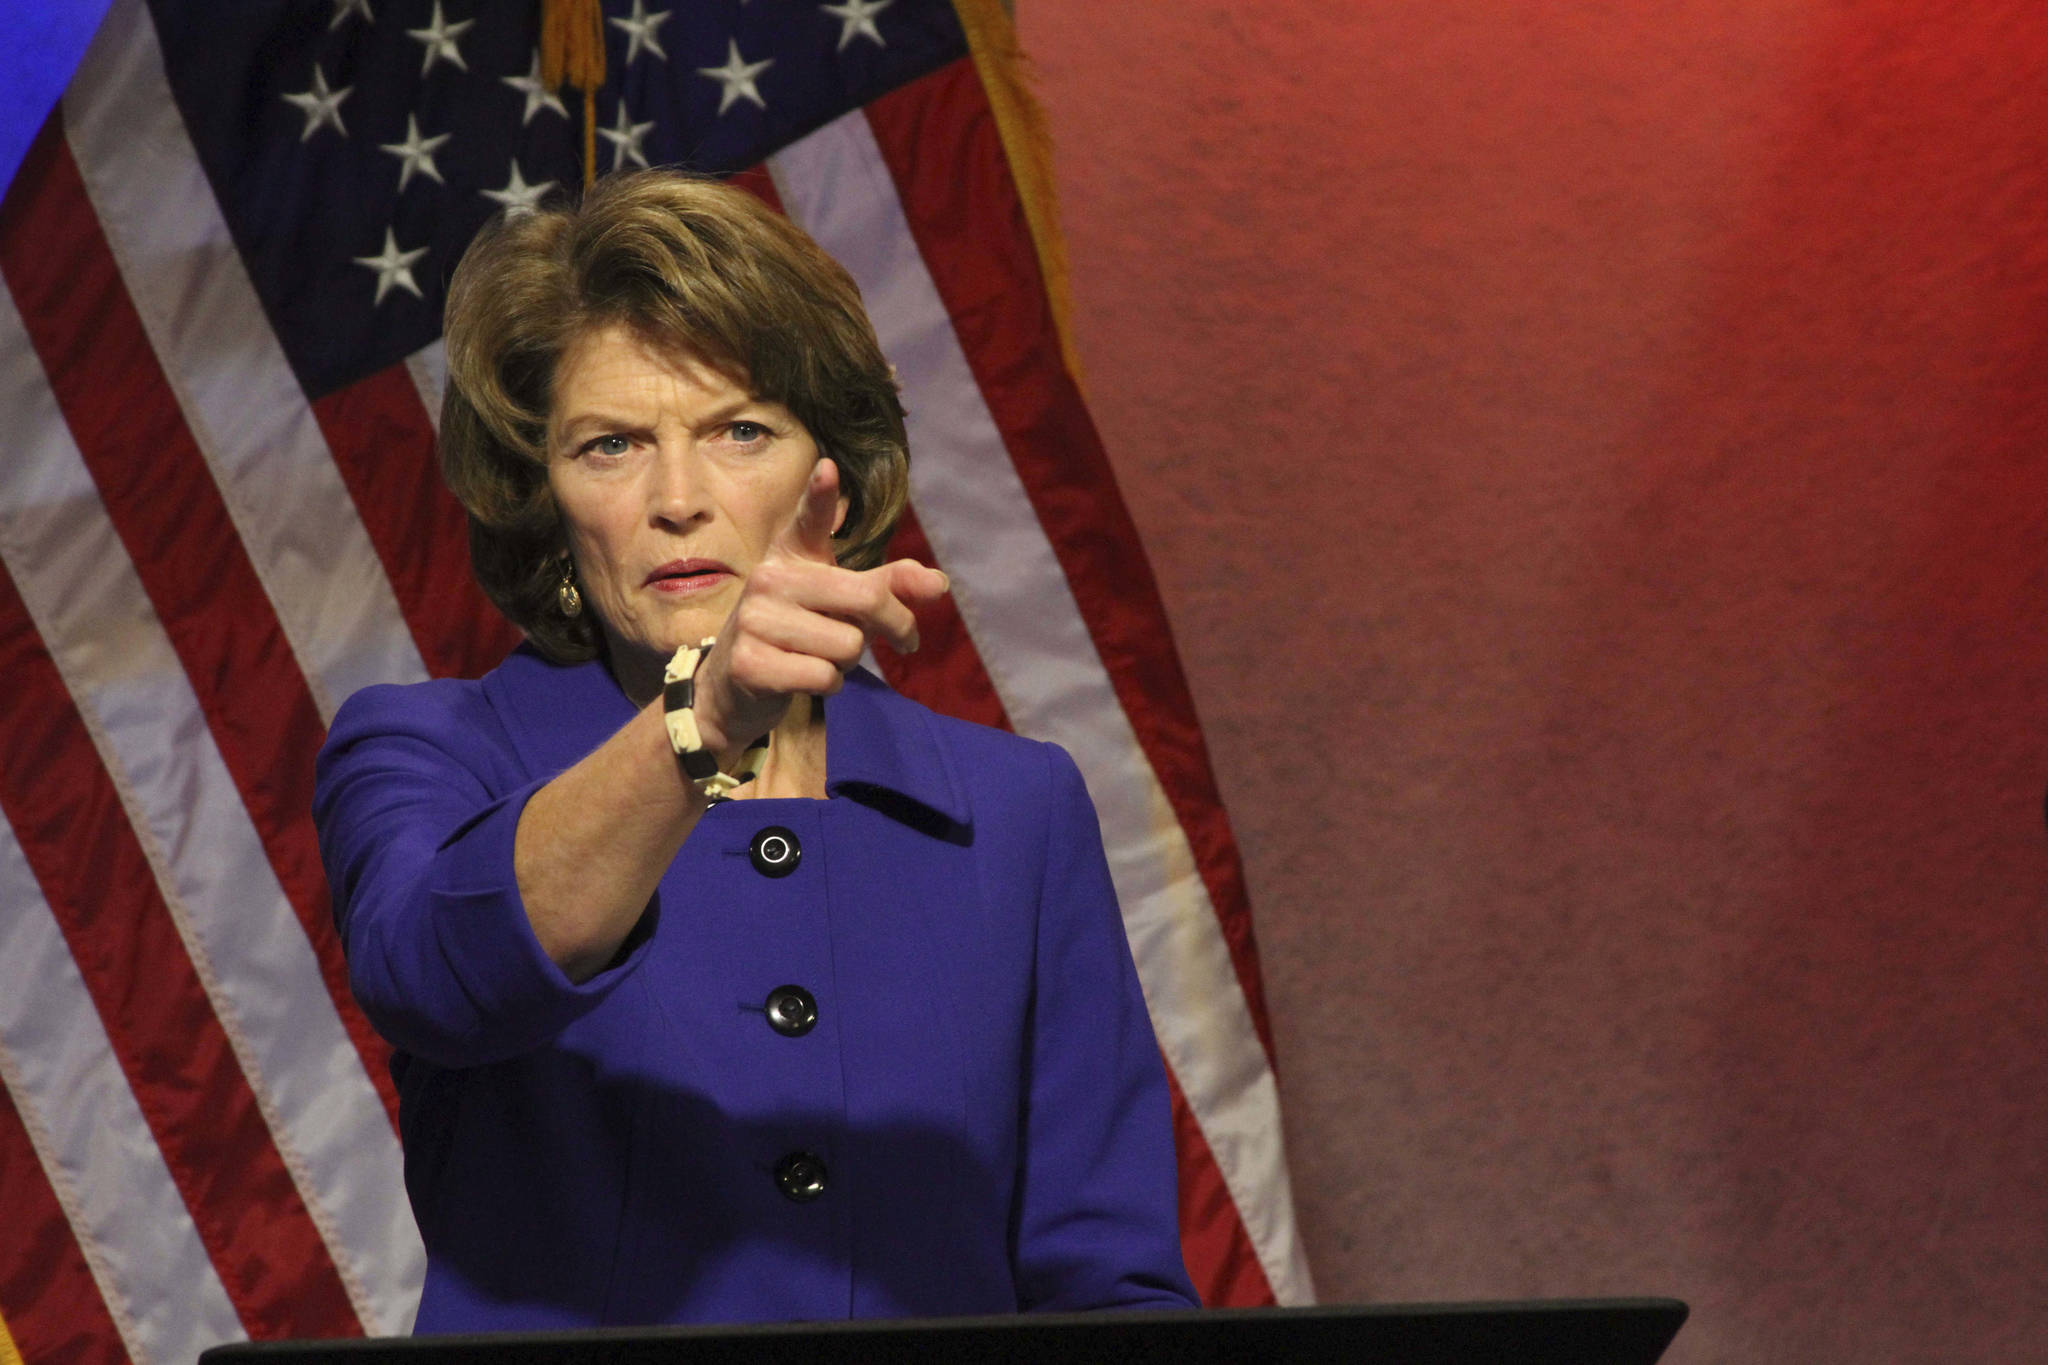 In this Nov. 3, 2016 file photo, U.S. Sen. Lisa Murkowski, R-Alaska, gestures before a public television debate in Anchorage, Alaska. President Donald Trump’s proposed budget calls for opening the coastal plain of the Arctic National Wildlife Refuge to oil and gas drilling. The refuge takes up an area the size of West Virginia and Connecticut combined in the northeast corner of Alaska.(AP Photo/Mark Thiessen, file)